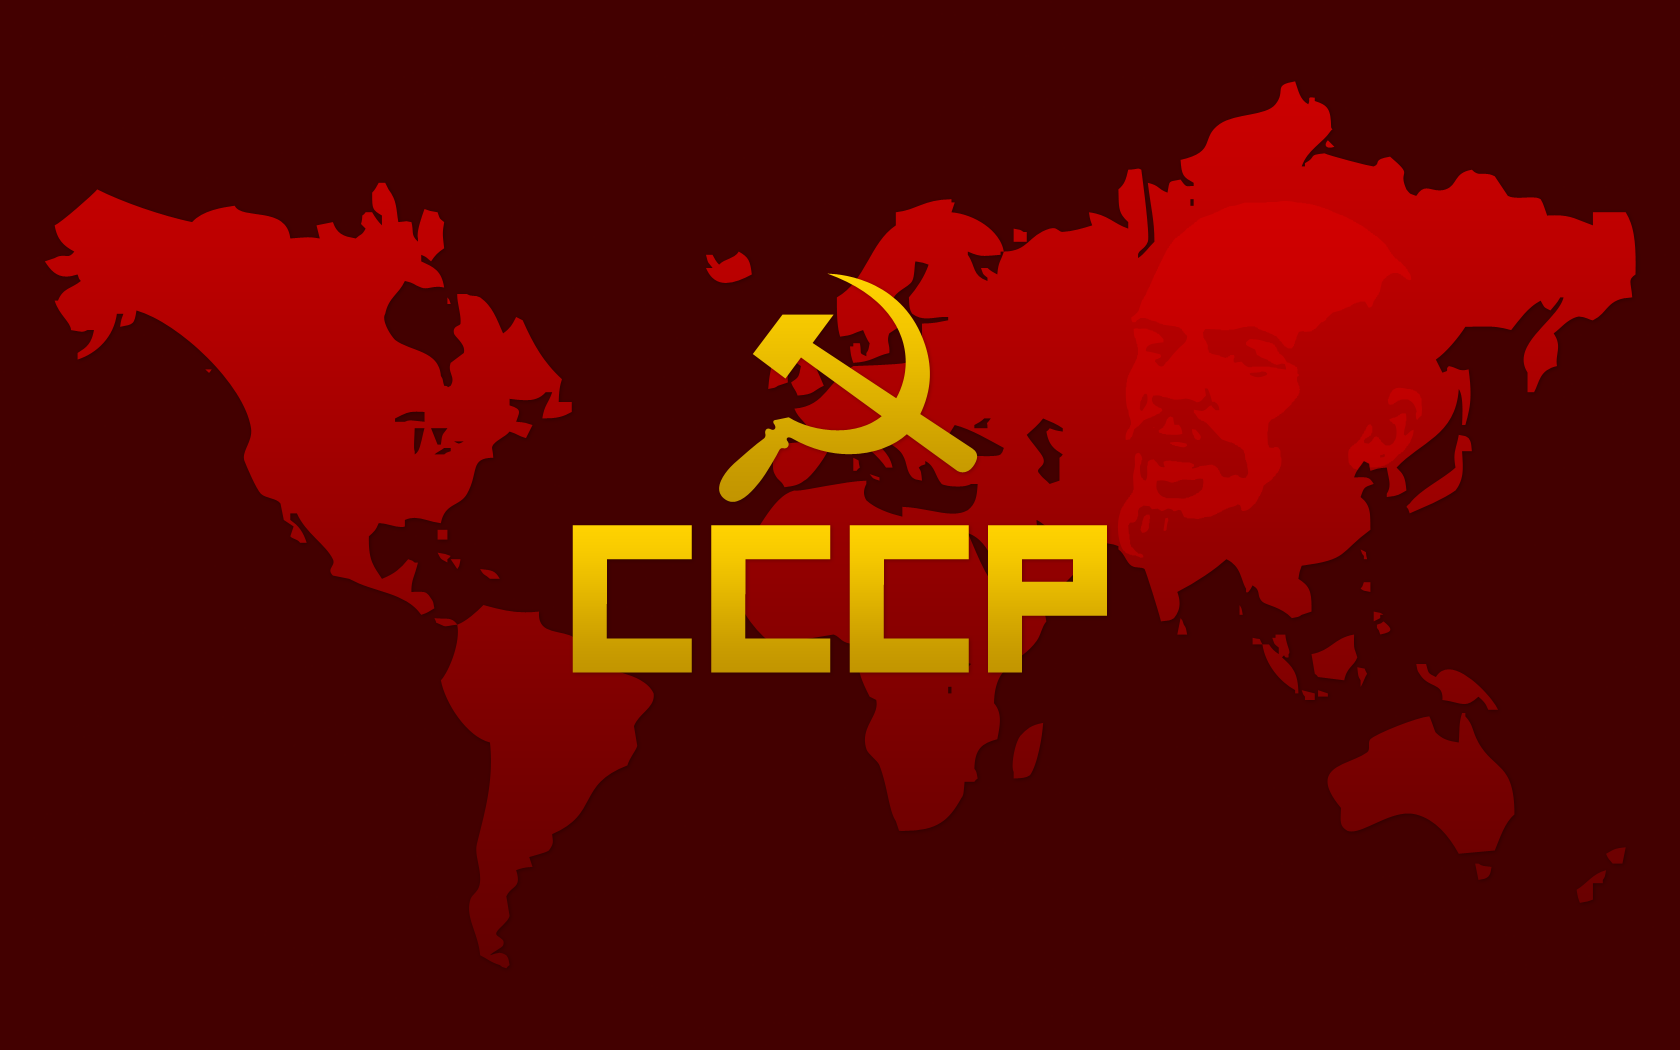 what is cccp on my computer